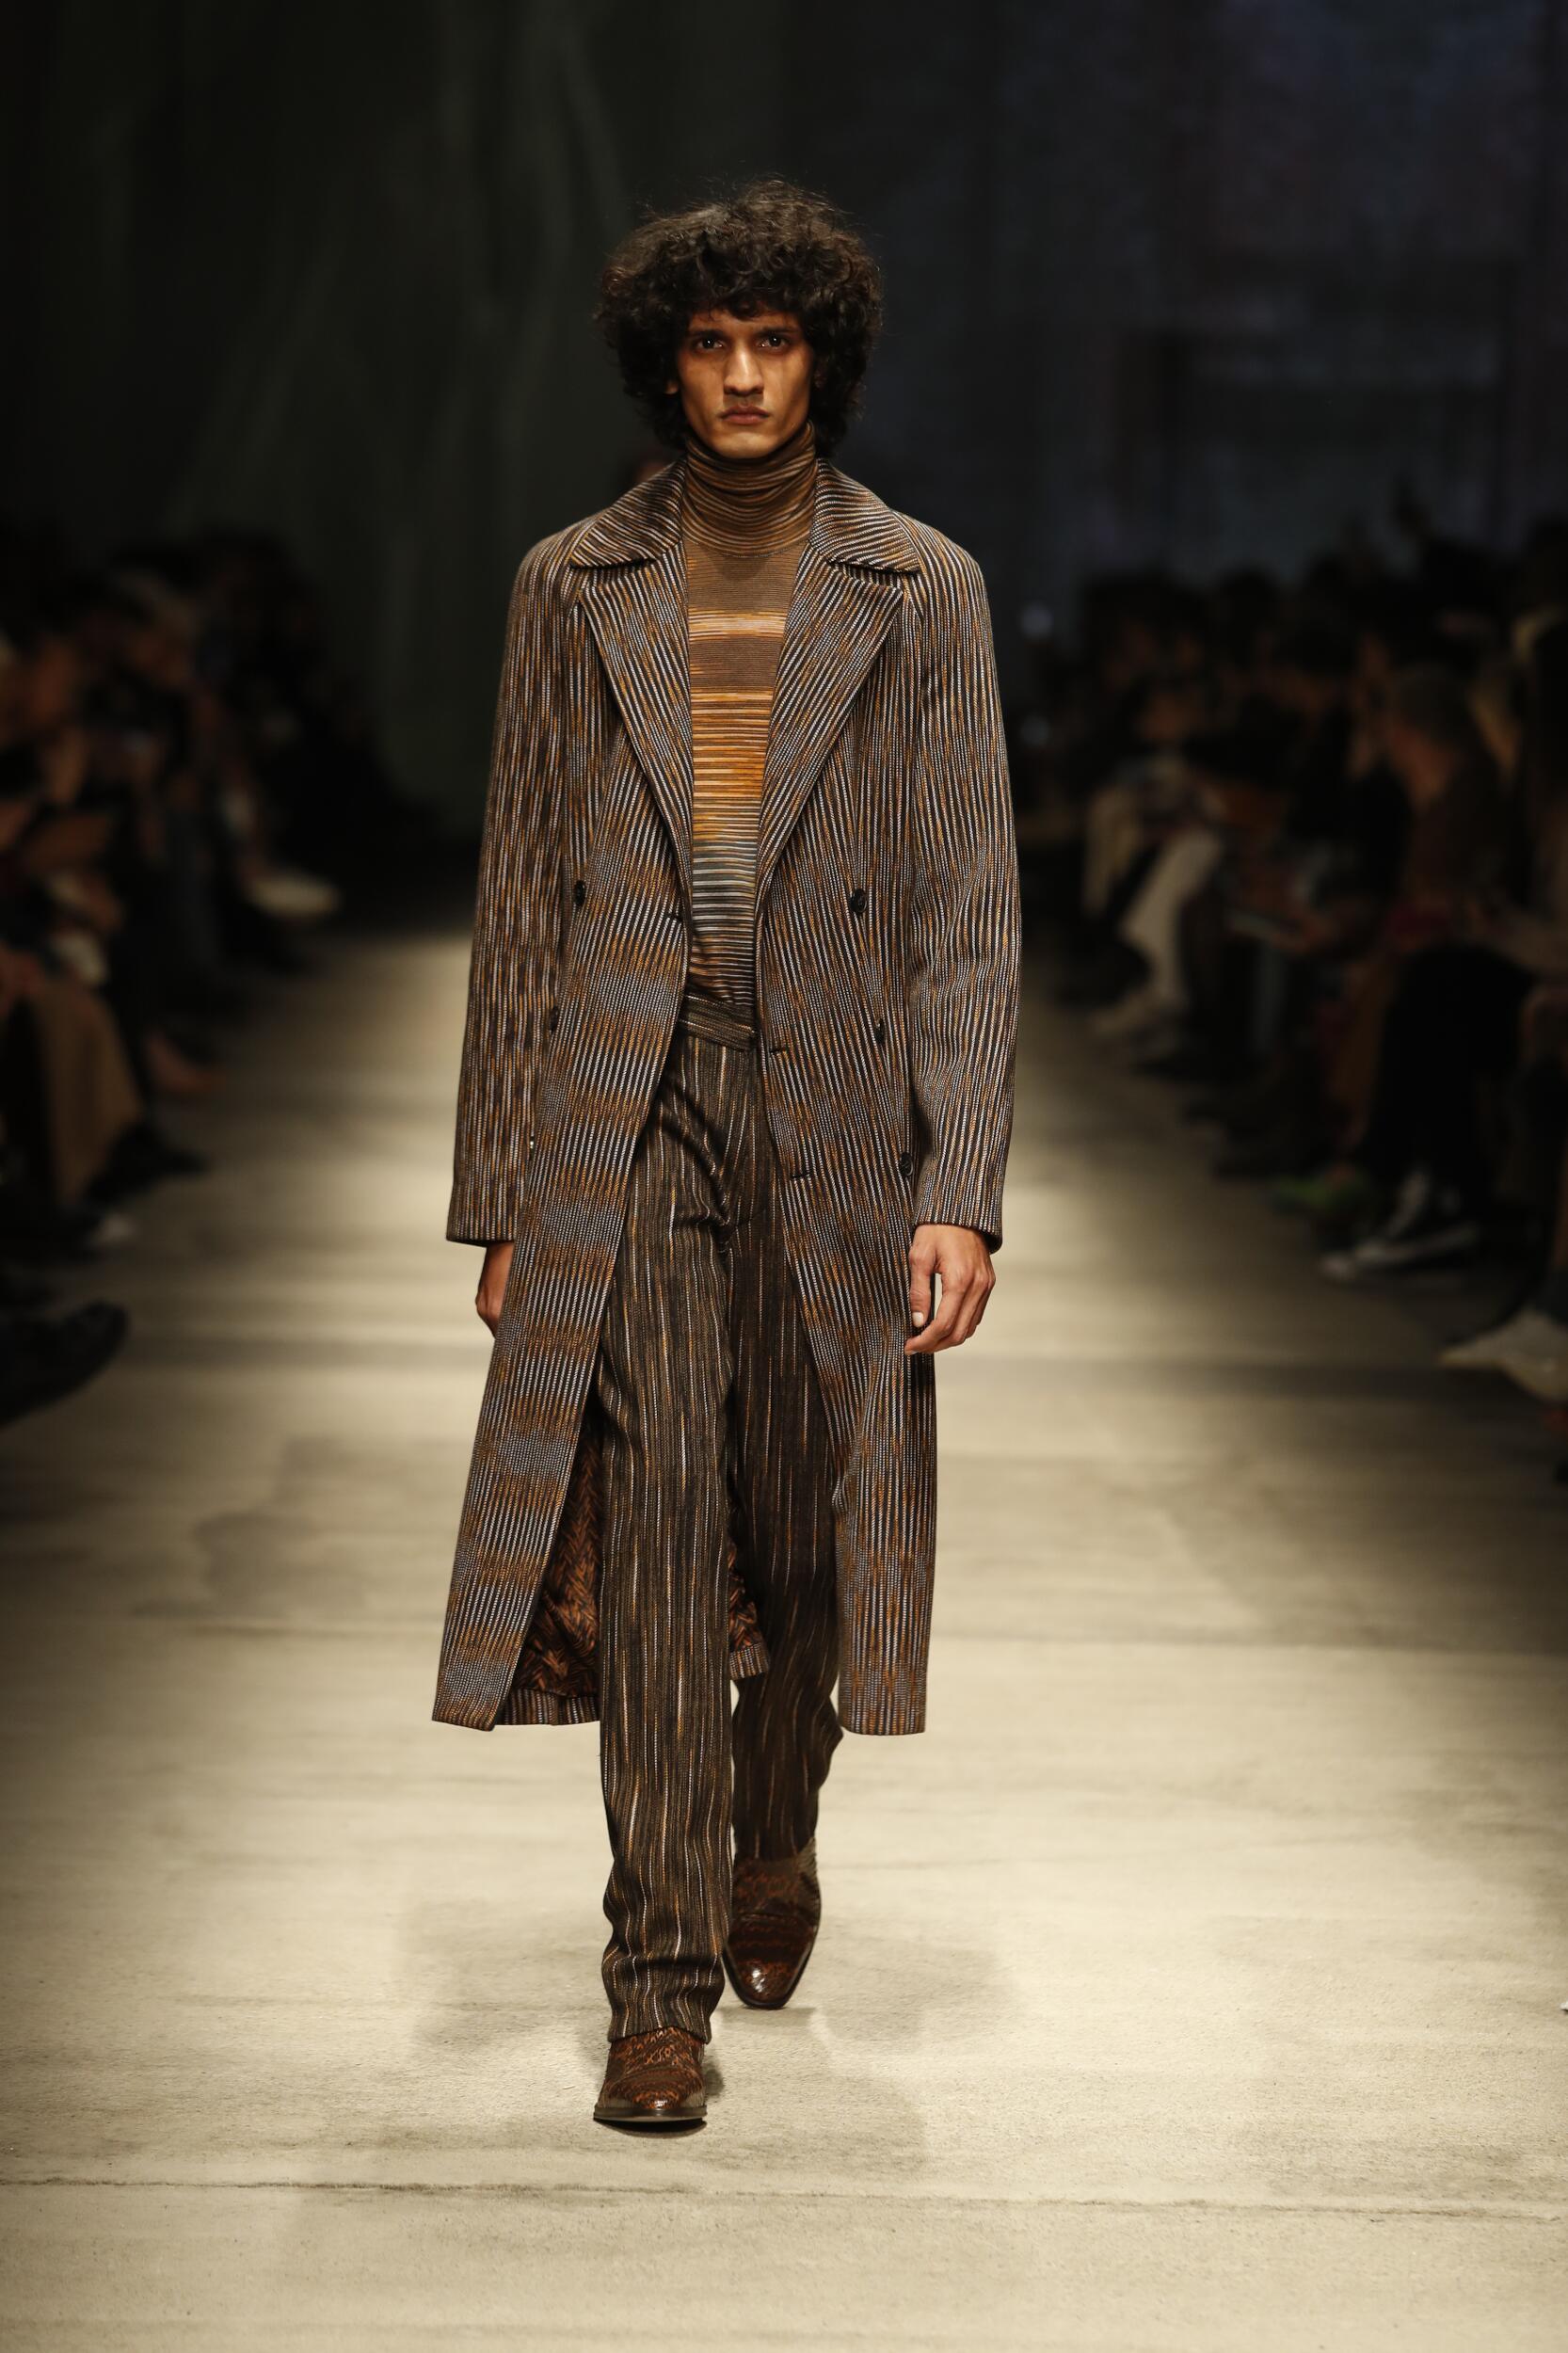 MISSONI FALL WINTER 2020 COLLECTION | The Skinny Beep